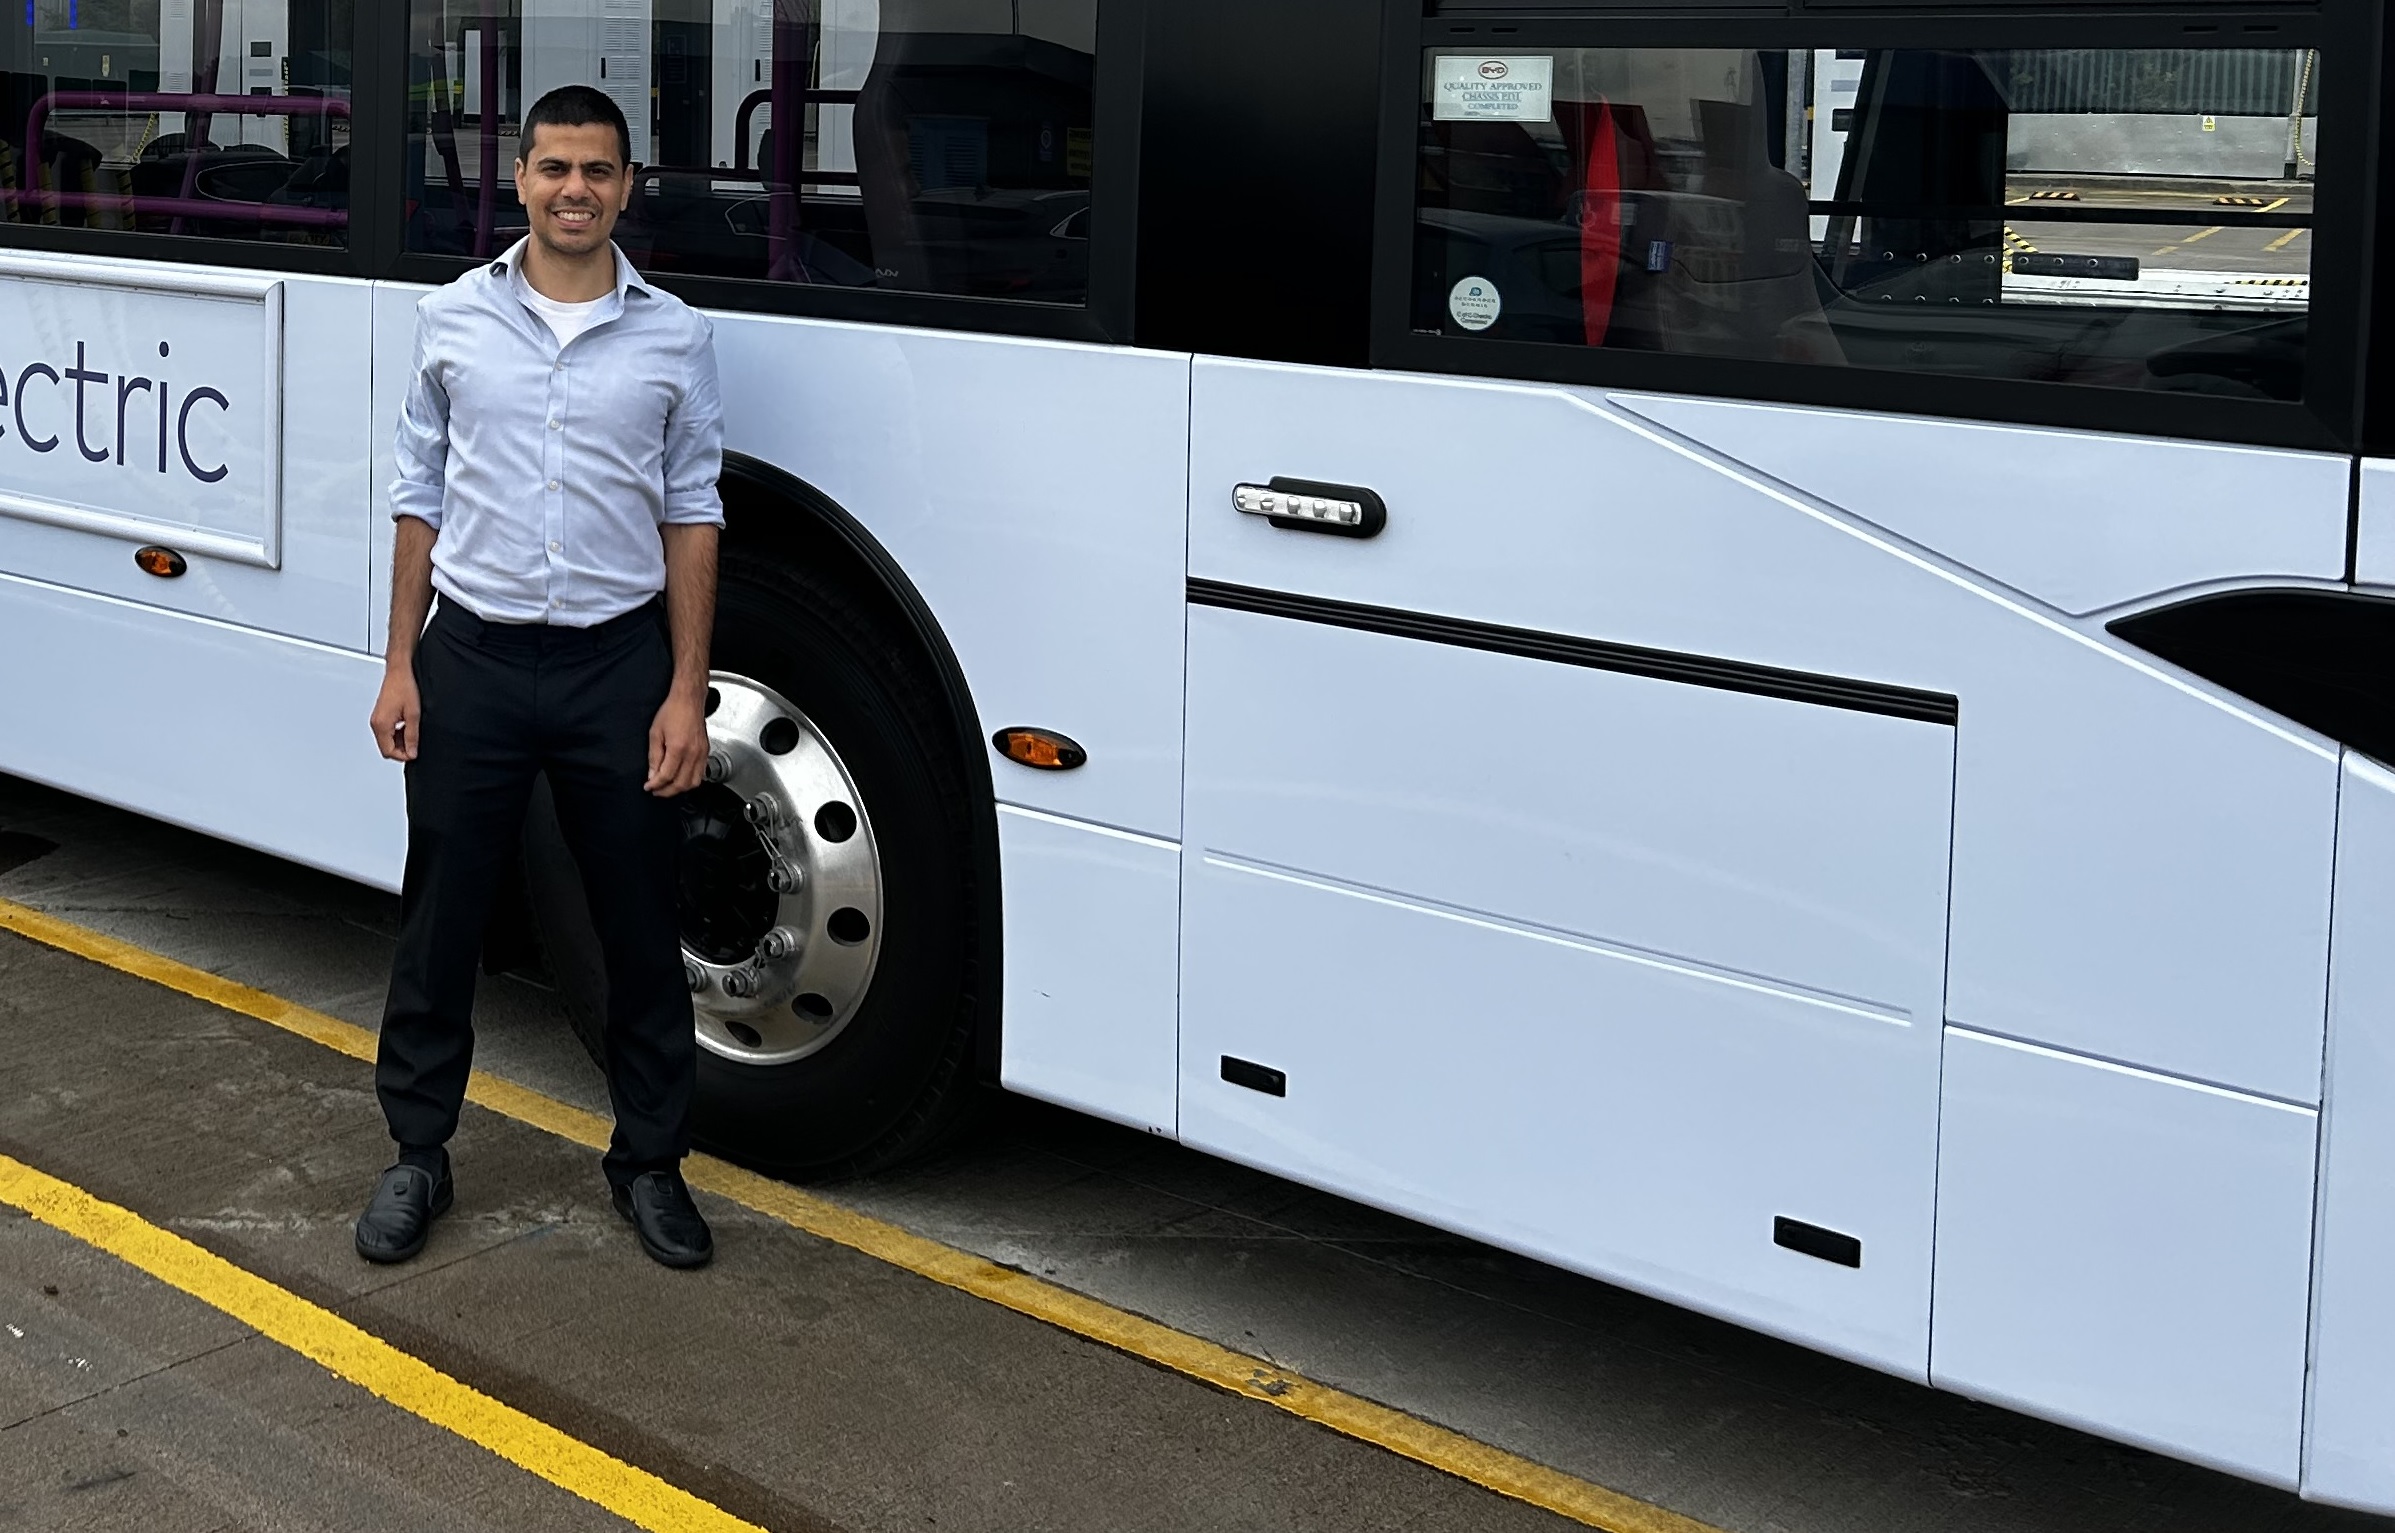 Faizan Ahmad named First Bus Decarbonisation Programme Director